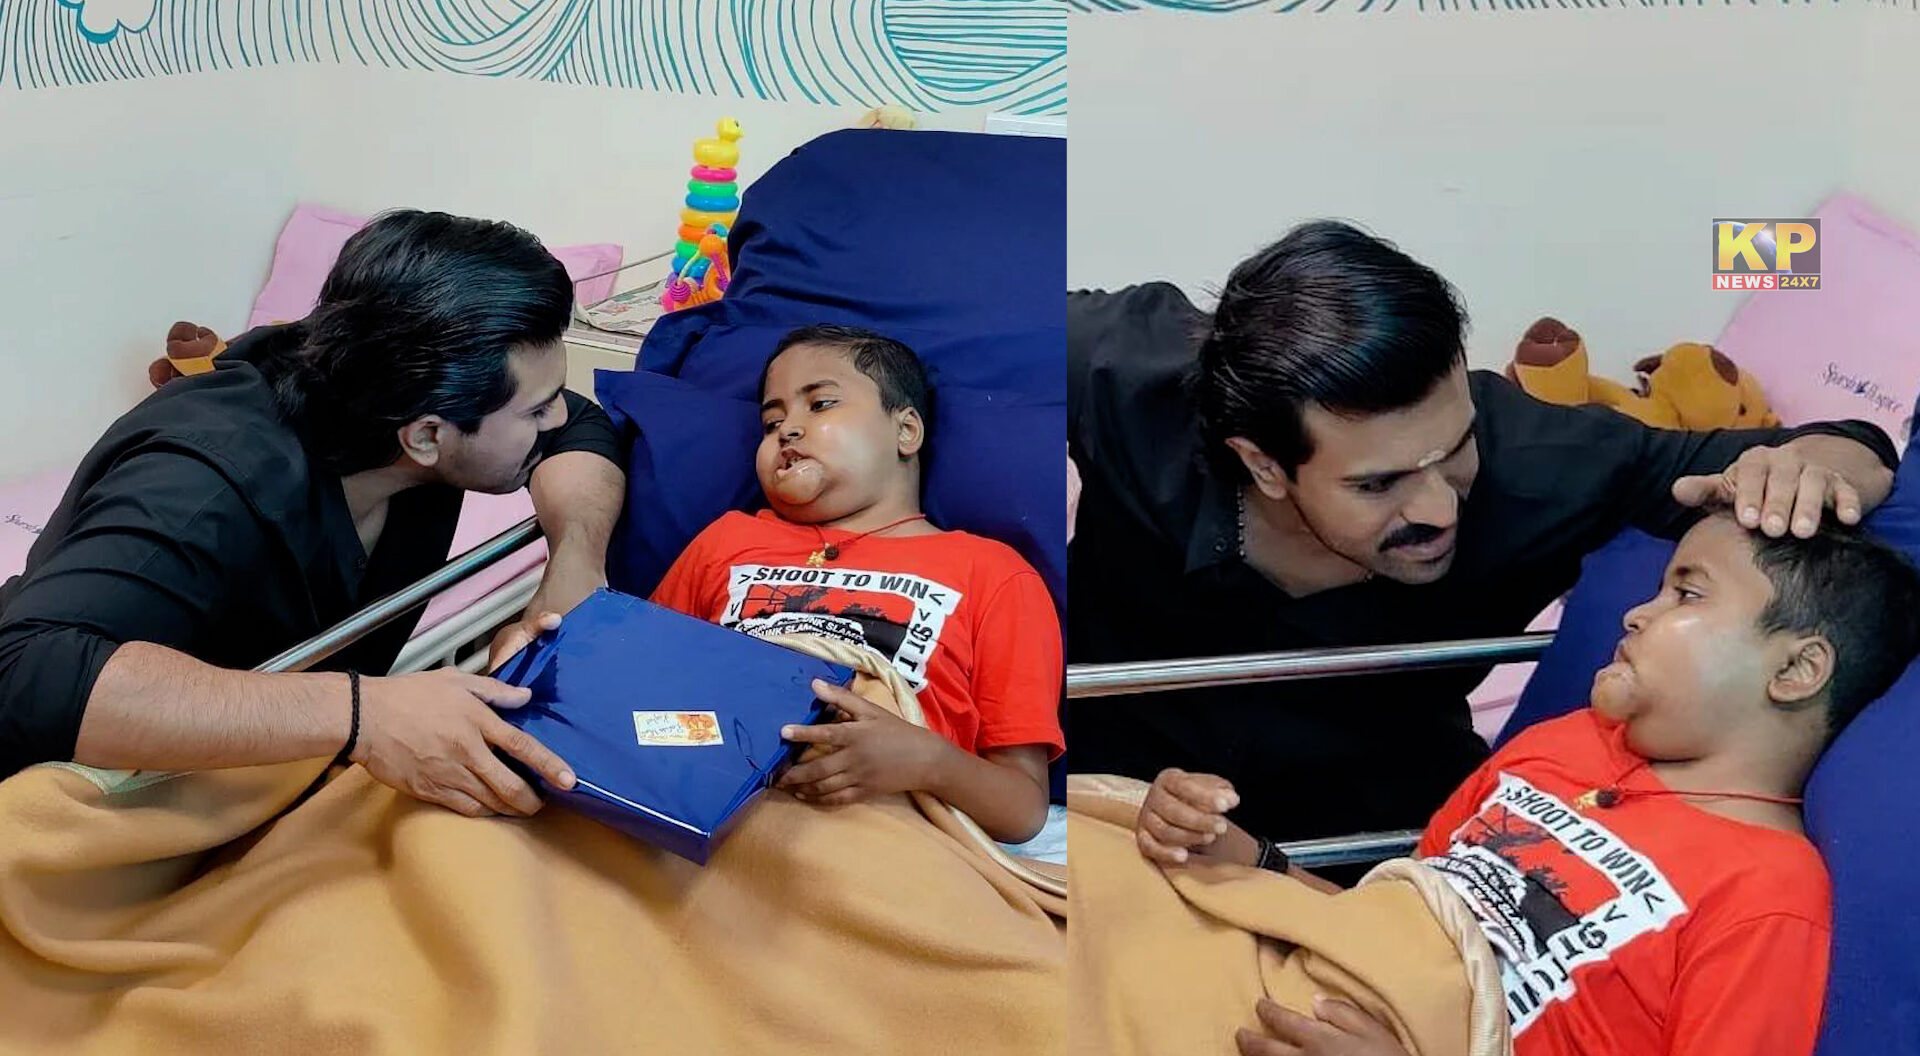 " Actor Ramcharan Teja Fulfills the Wish of a Young Cancer Patient"